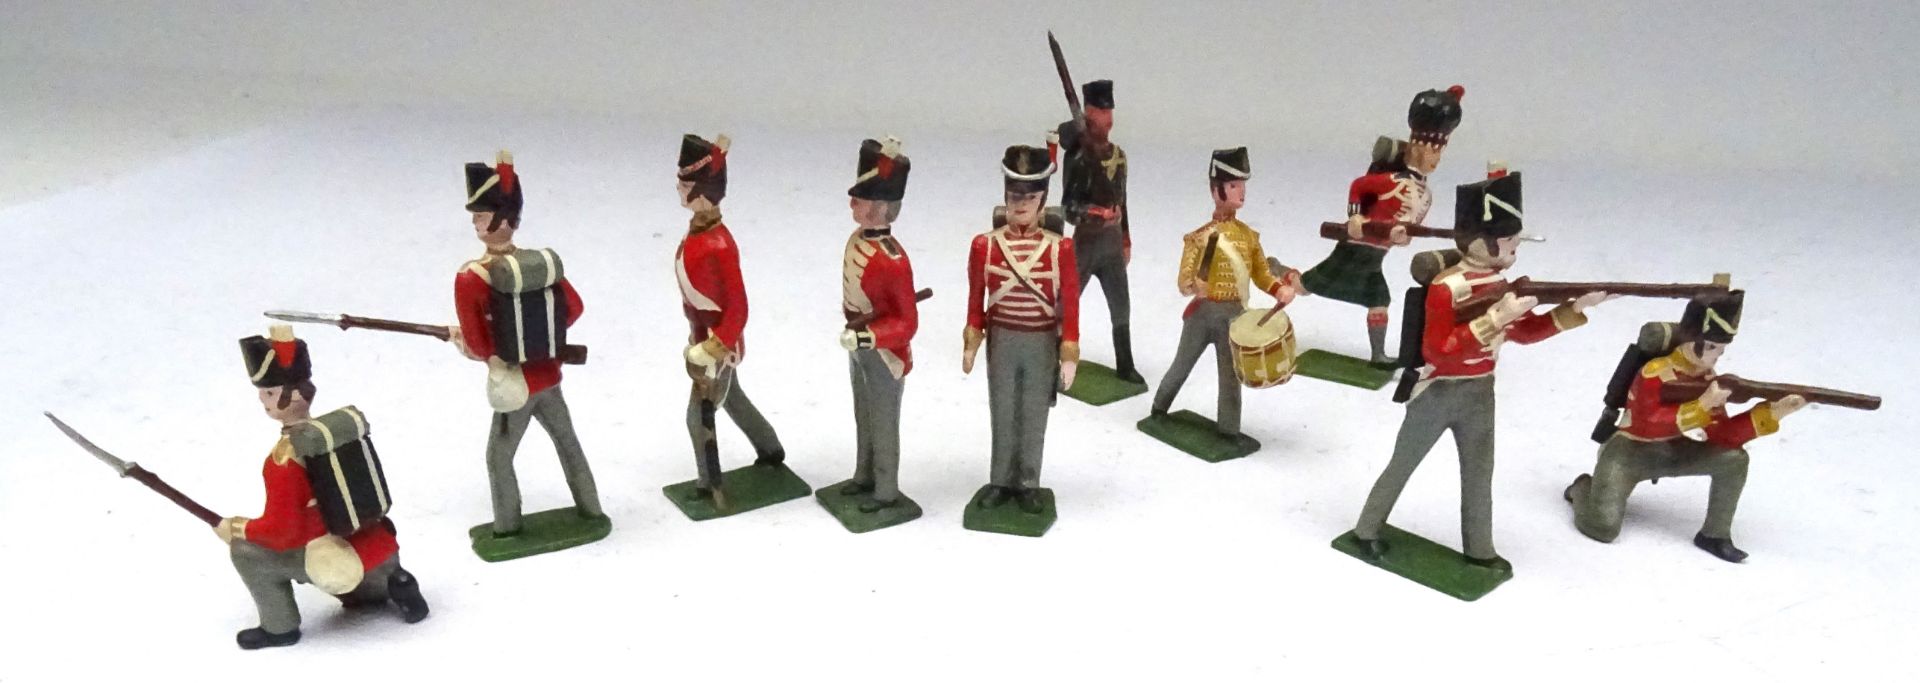 Britains and other conversions to British Napoleonic Infantry - Image 8 of 9